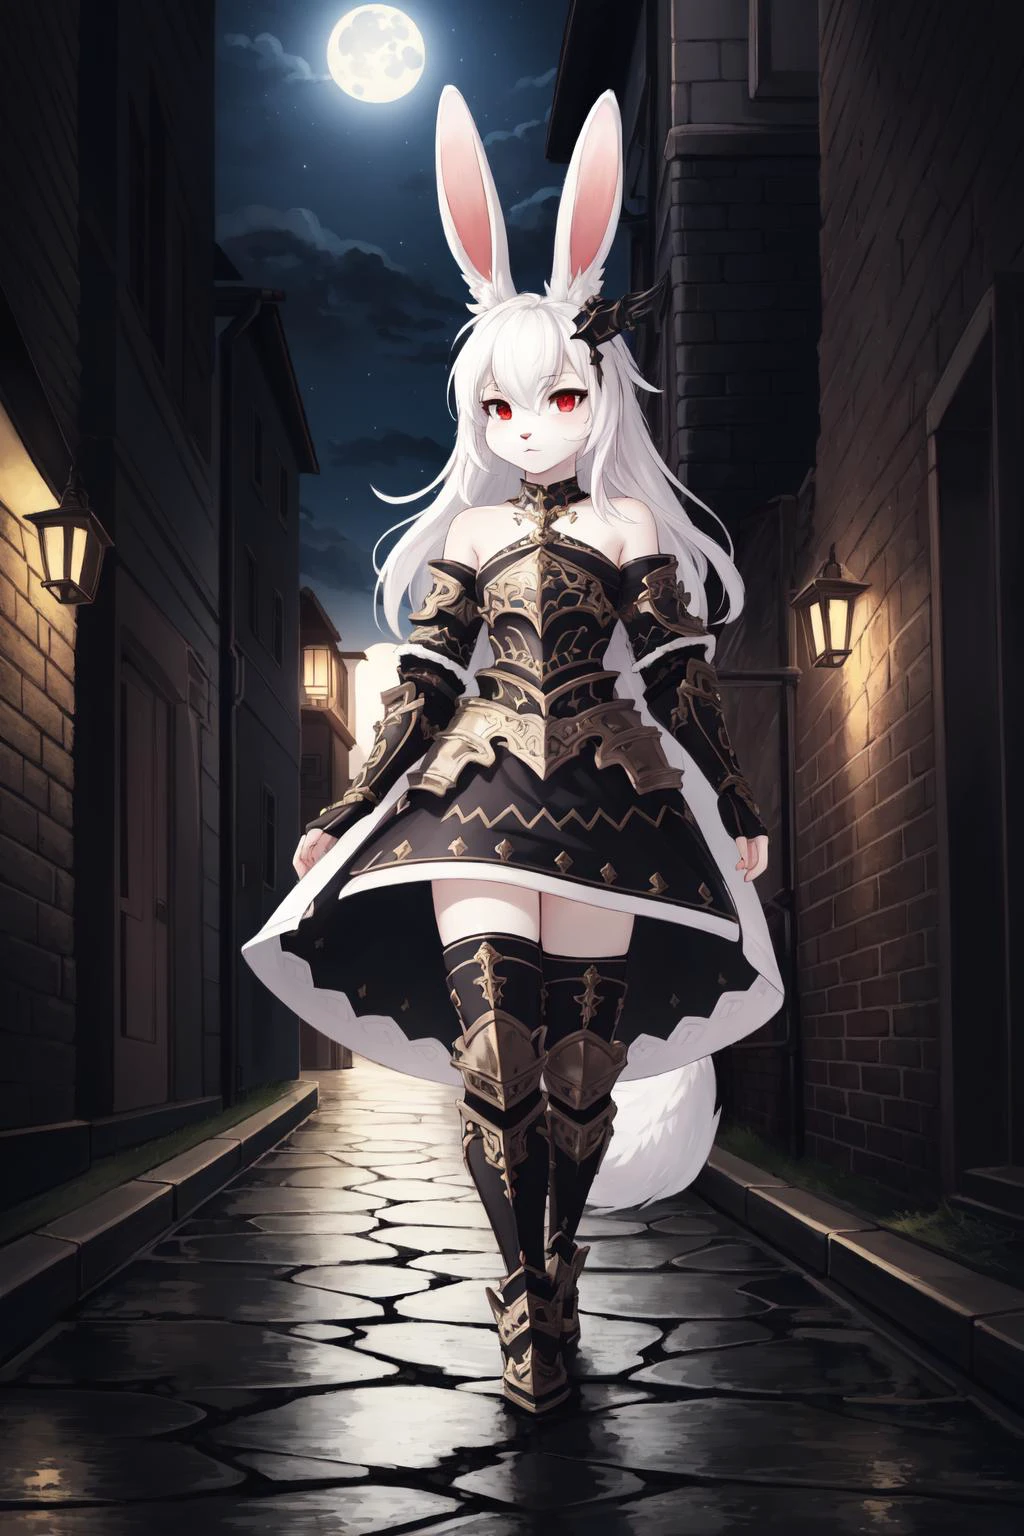 (masterpiece, best quality),  intricate details, 8k, artstation, wallpaper, official art, splash art, sharp focus,
(anthro rabbit girl, full body fur, white furrabbit ears:1.2),, (1girl),   white hair, red eyes, , thin figure, small breasts, long flowing white hair, messy hair,
mage, arcane ritual, gloomy back alley, city streets, wet pavement, night time, stars in sky, moonlight, 
floating magical tome,  War_Glam, wearing  War_Glam,  black armor, silver filigree, pauldrons, armored skirt,  dark theme,  full body,